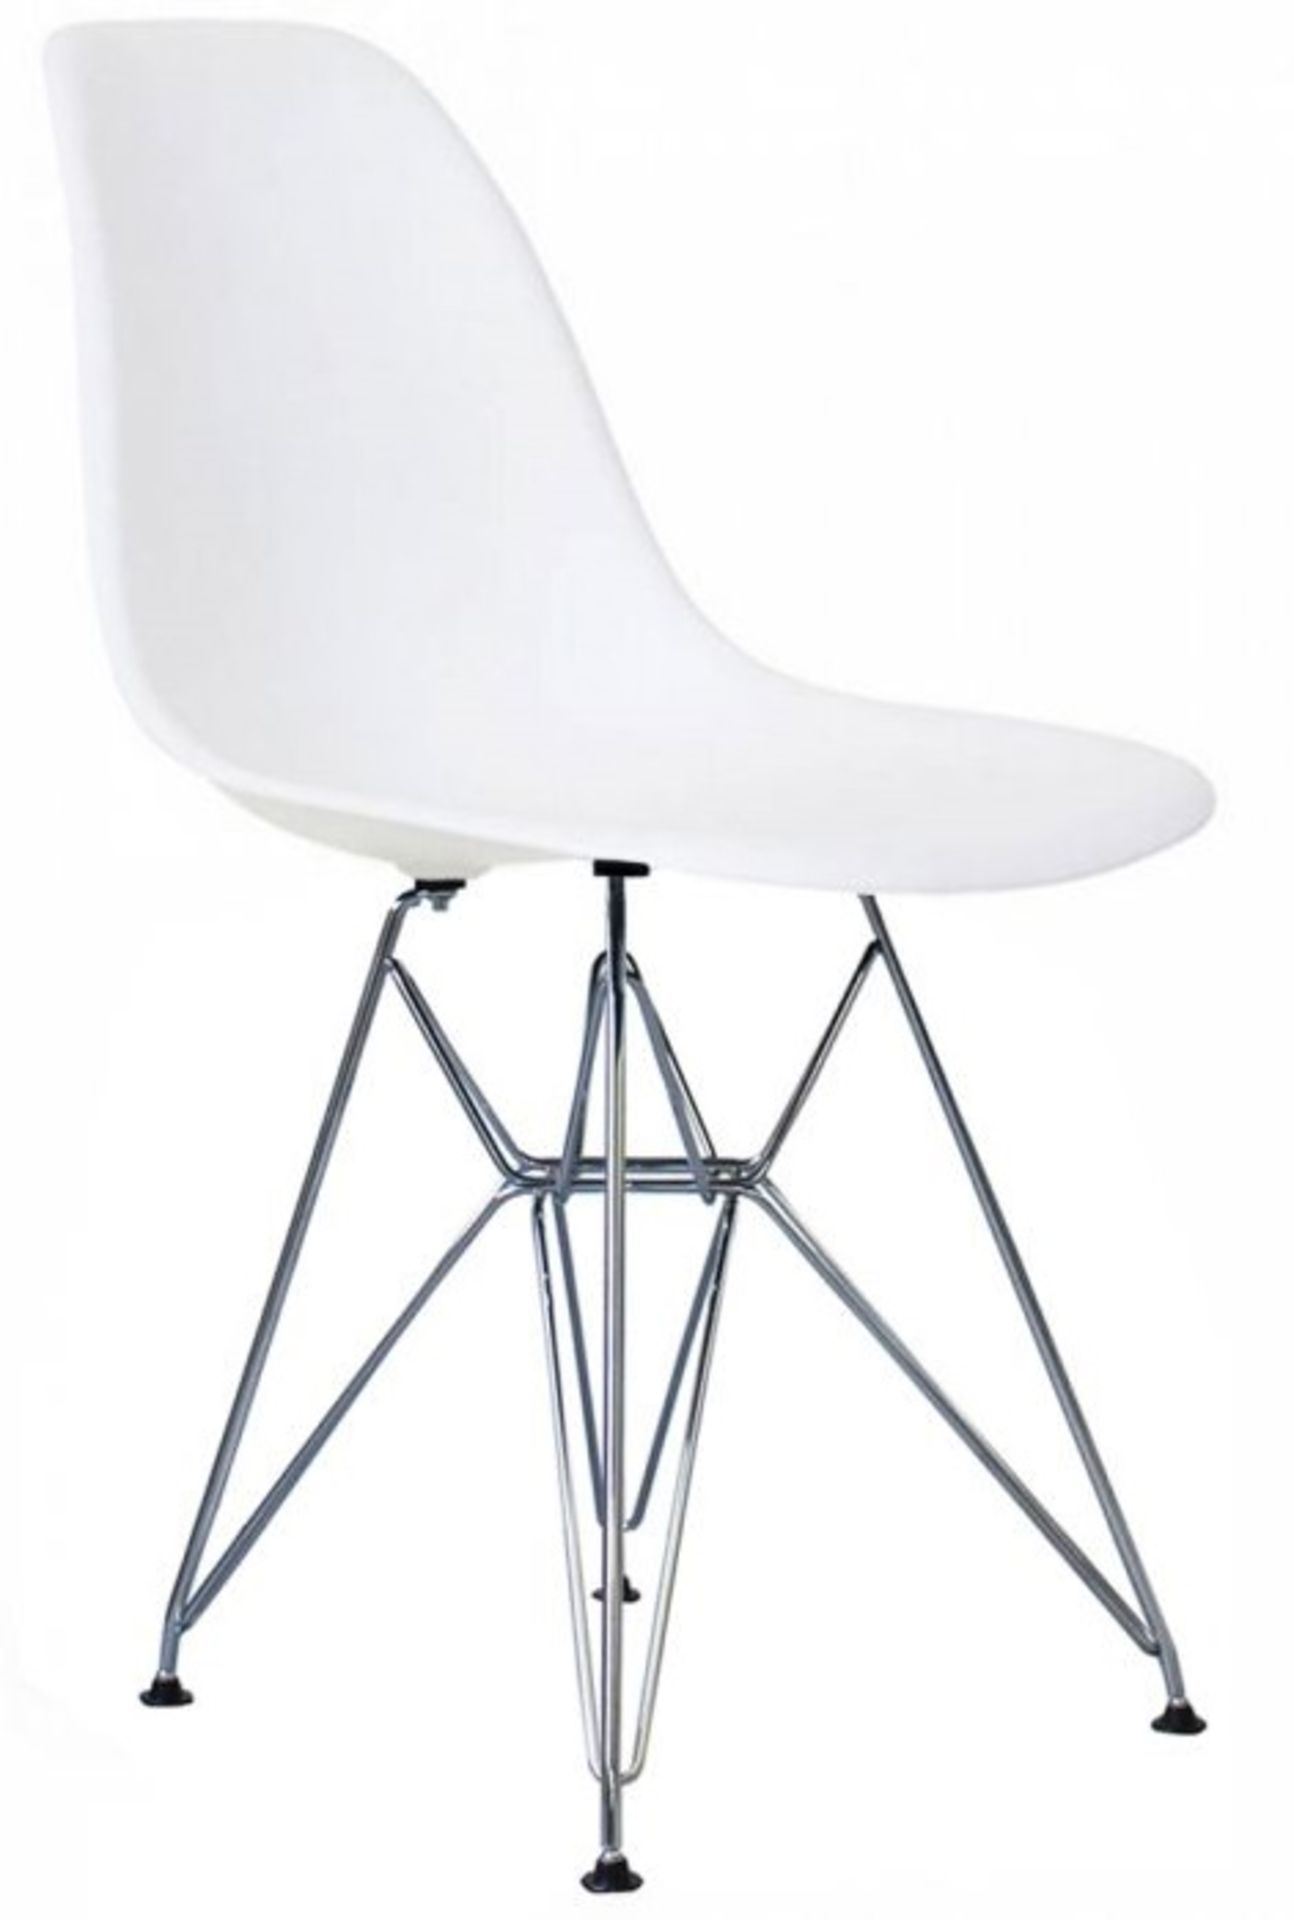 A Set Of 6 x Eames-Style Dining Chairs in White - Includes 2 x Carvers - Image 2 of 6